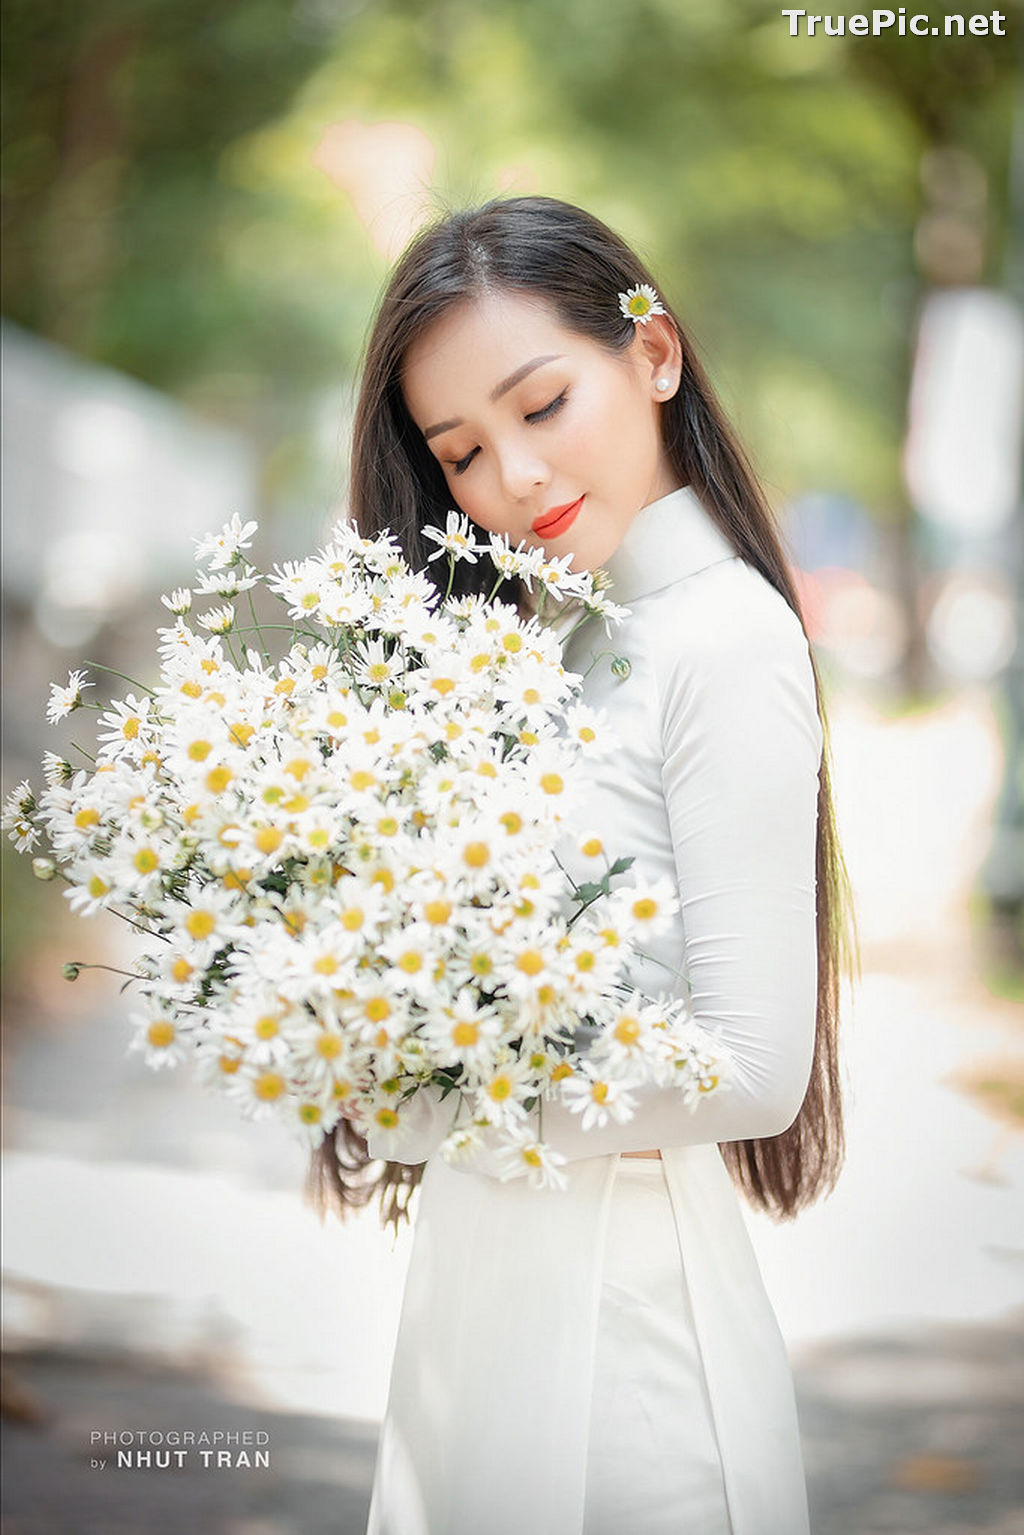 Image The Beauty of Vietnamese Girls with Traditional Dress (Ao Dai) #5 - TruePic.net - Picture-44